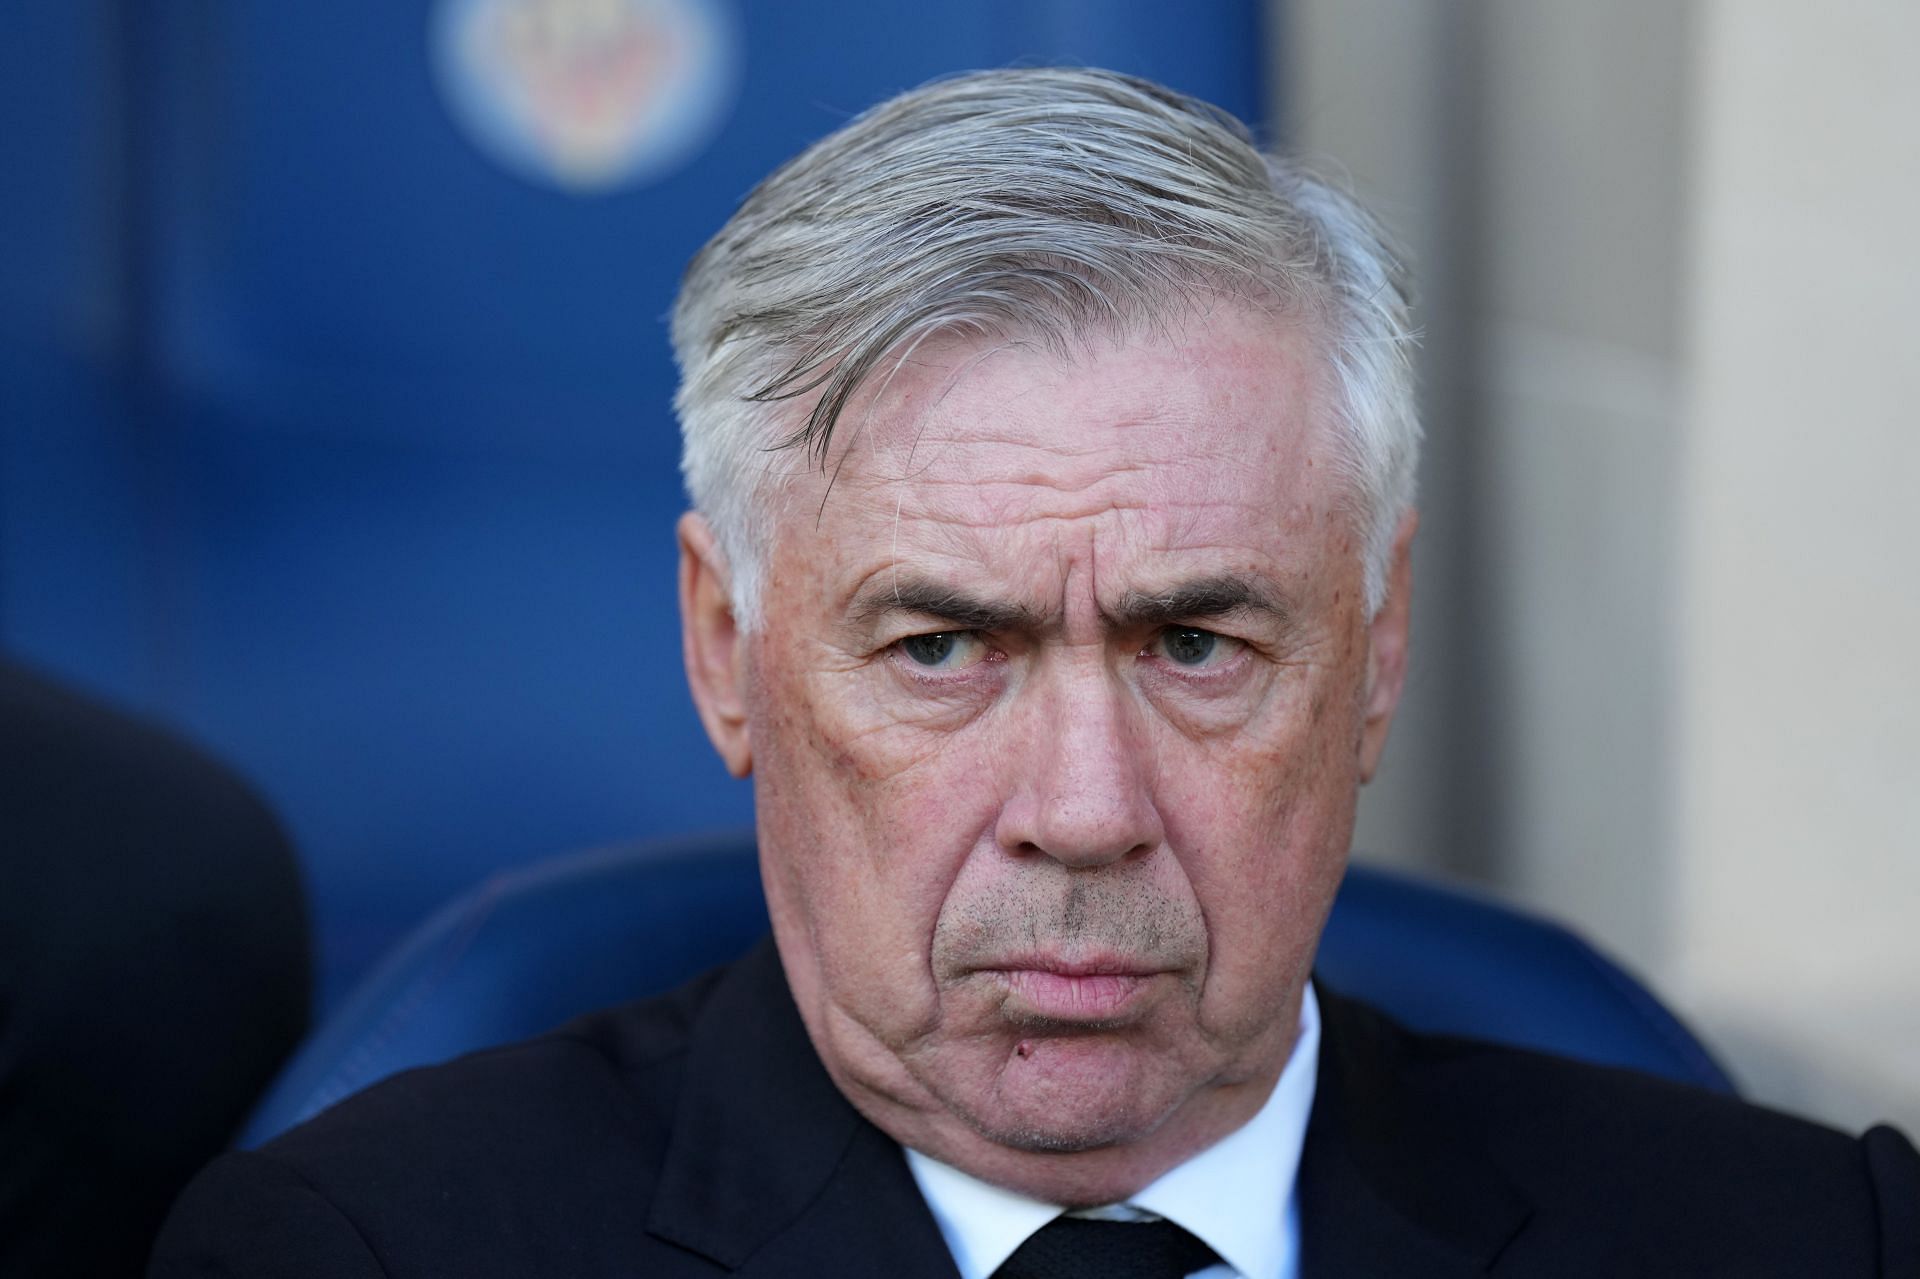 Carlo Ancelotti says Real Madrid superstar's condition is 'not good' after 2022 FIFA World Cup 